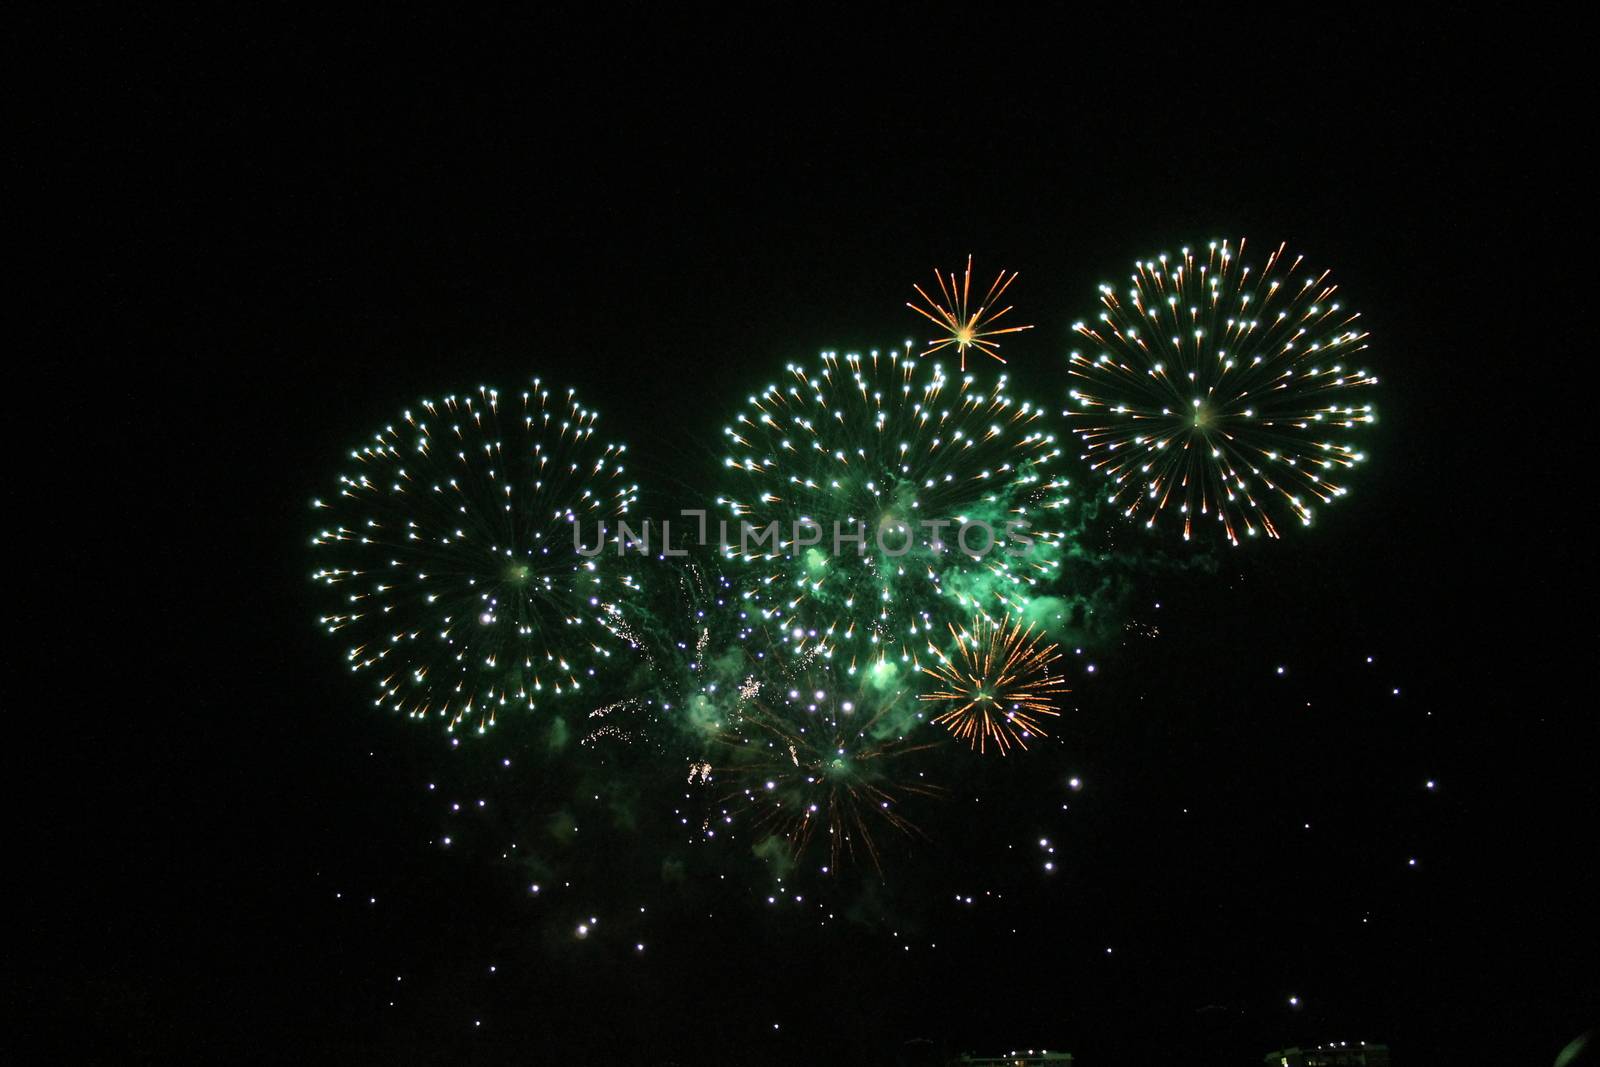 Fireworks light up the sky with dazzling display by cheekylorns